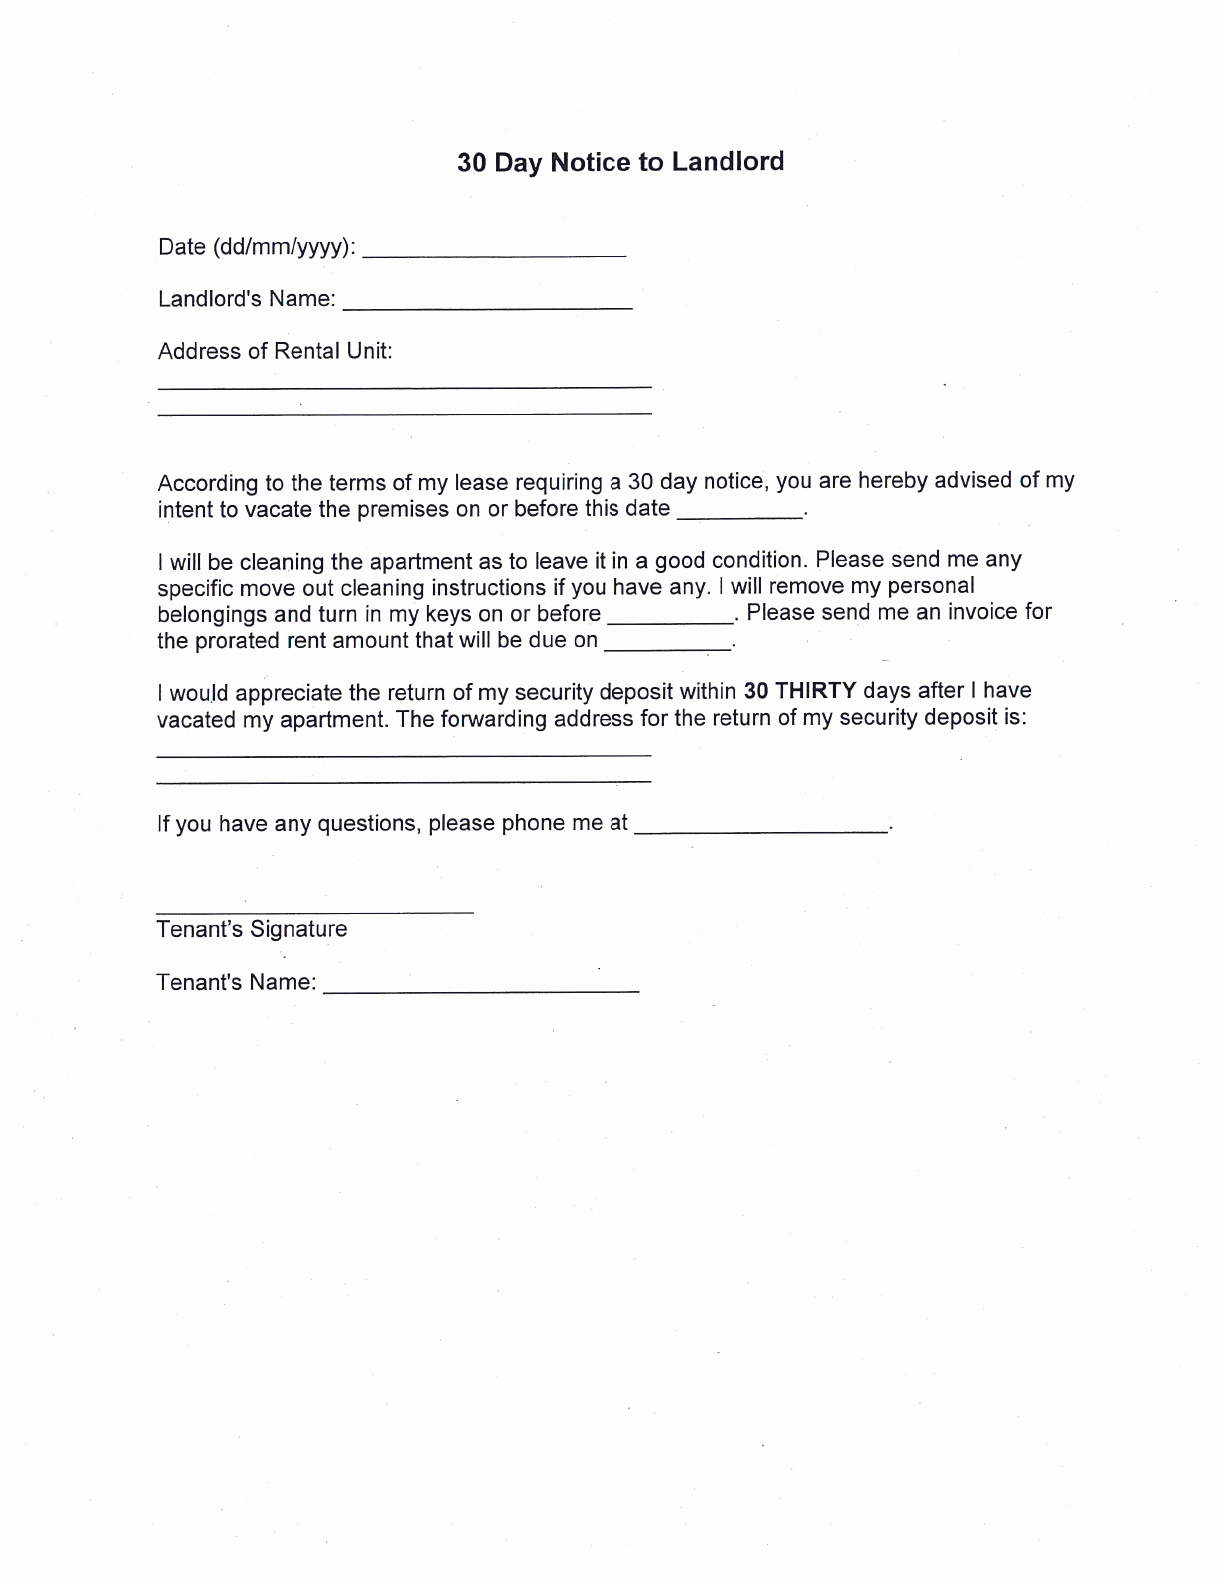 30 Day Notice Template Lovely Download 30 Day Notice to Landlord for Free formtemplate